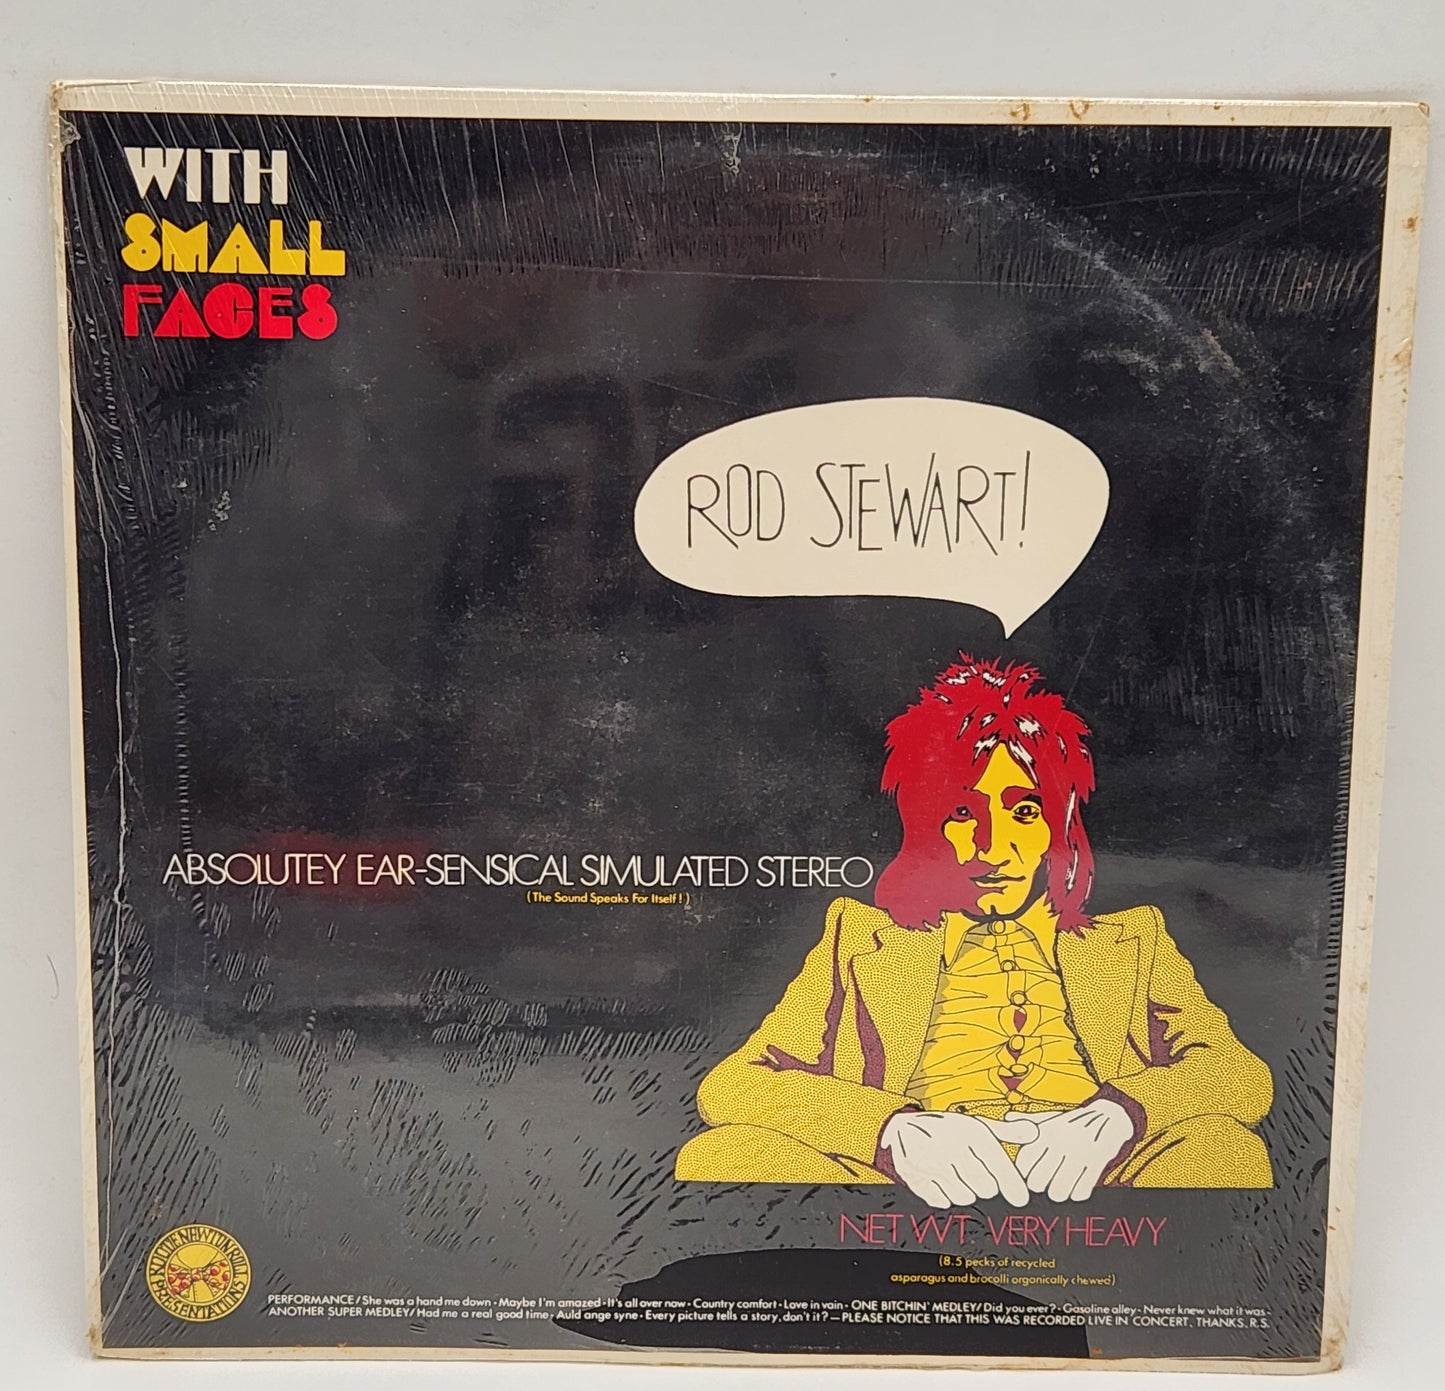 SEALED Rod Stewart With Small Faces Blues Rock Unofficial Release Album